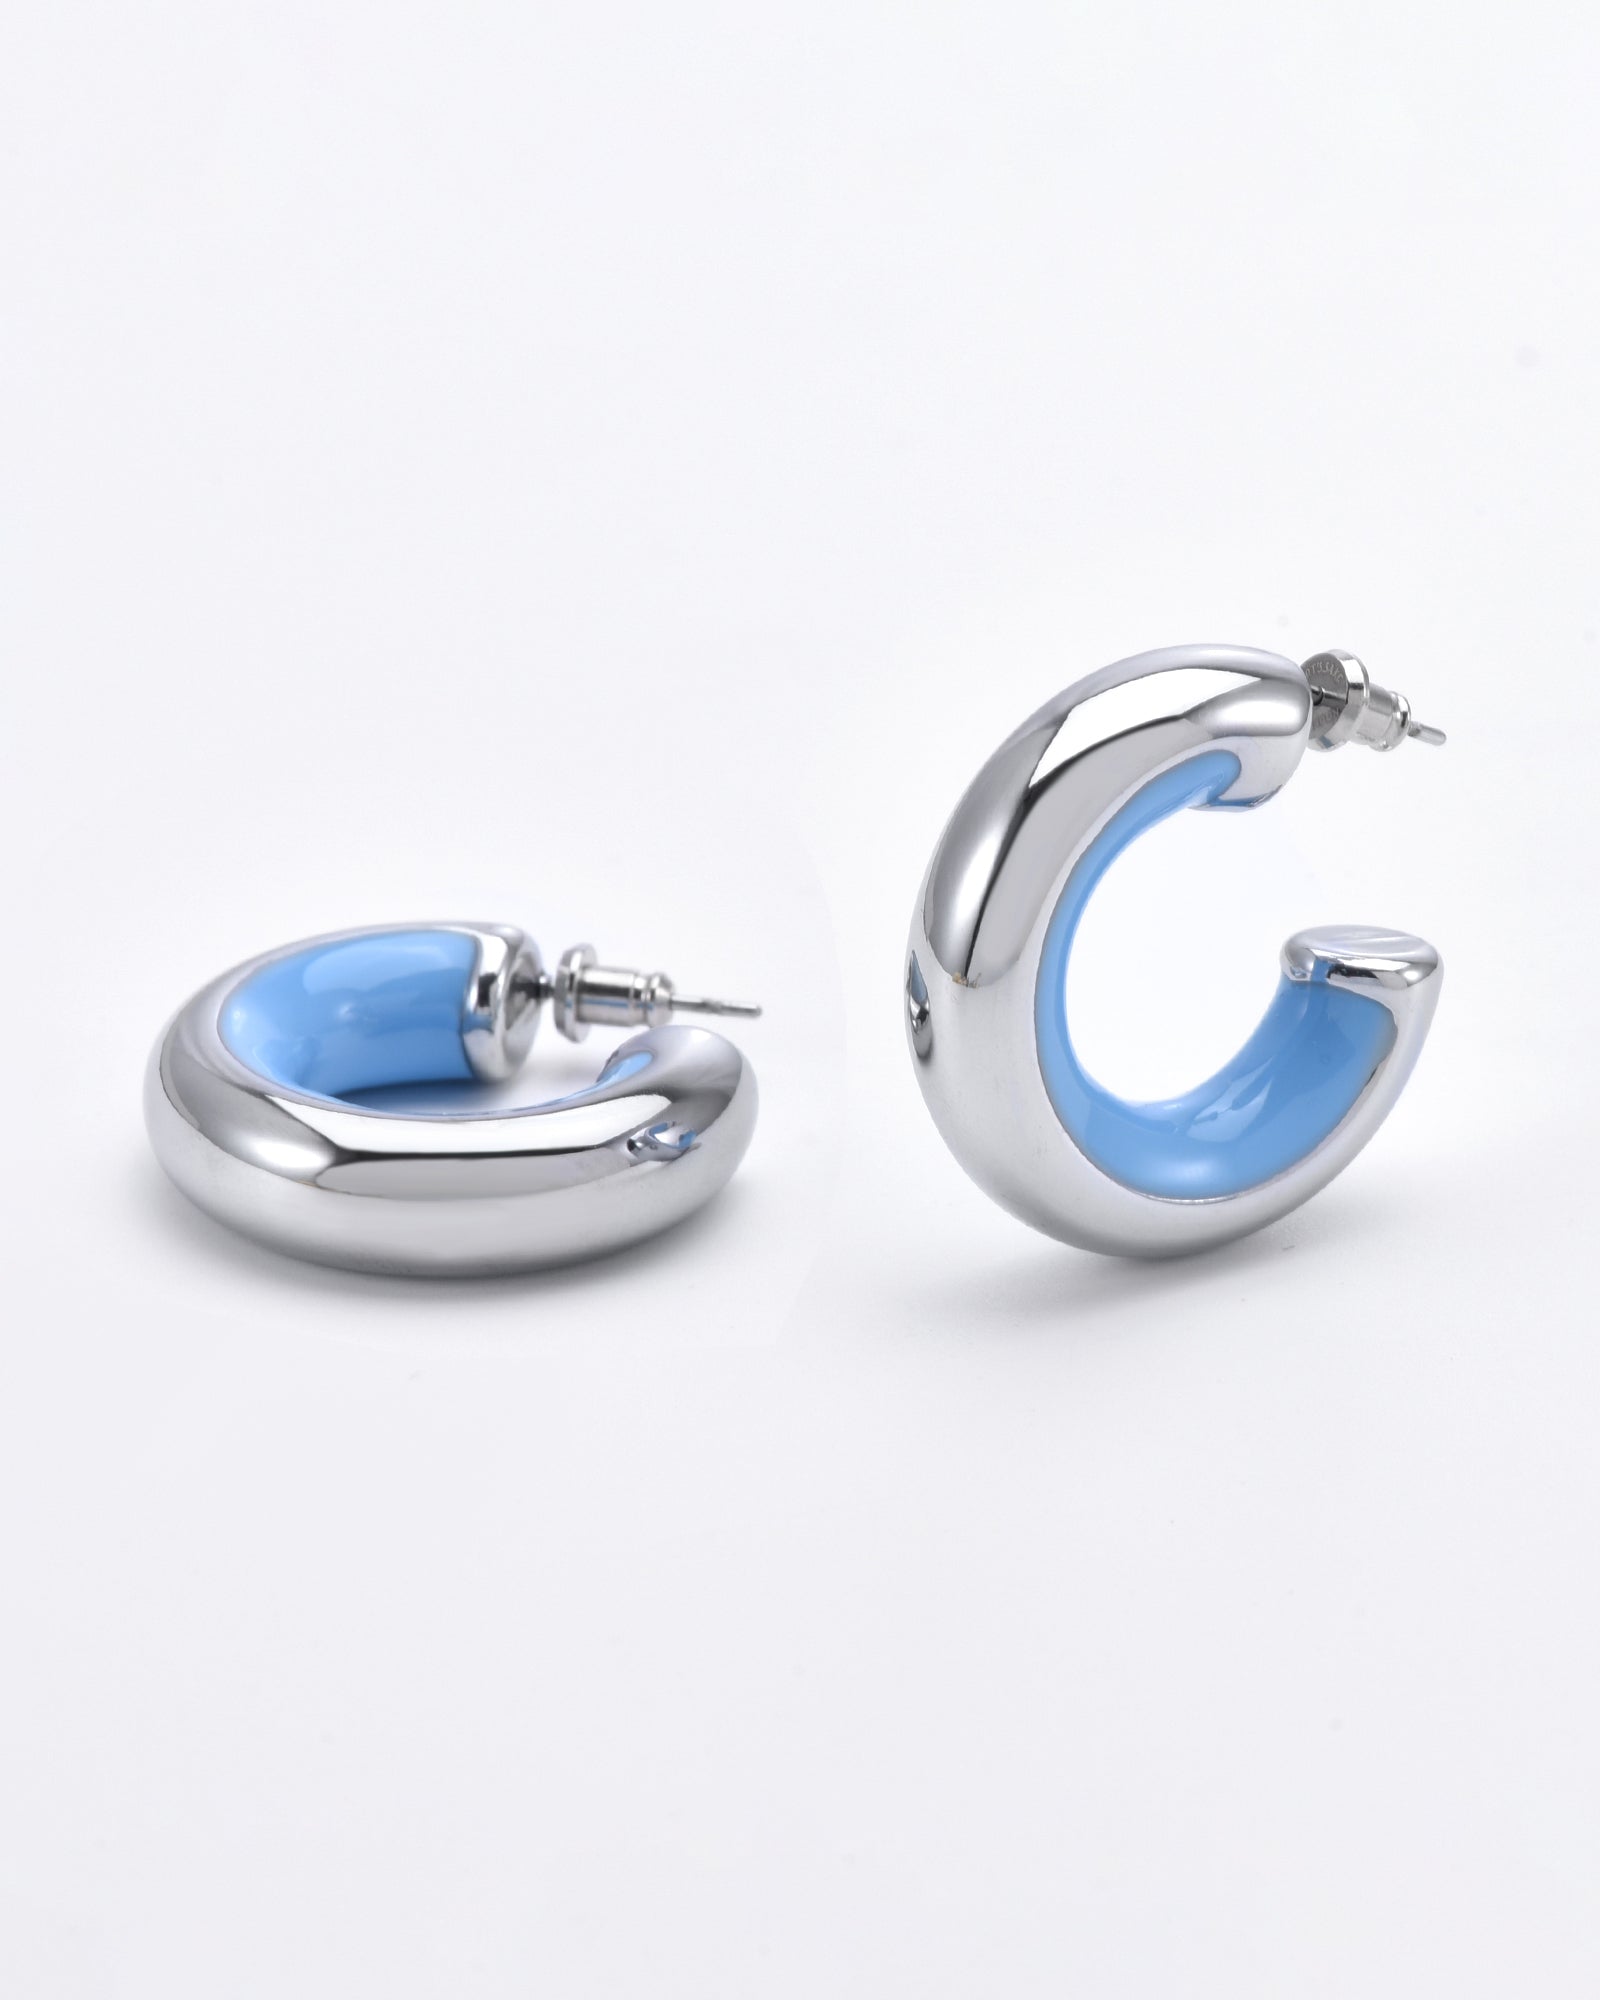 A pair of silver hoop Lotus Earrings Blue by For Art&#39;s Sake® with an inner lining of light blue are pictured against a plain white background. The 24-karat gold plated earrings are semi-circular and one is laid flat while the other is standing upright.